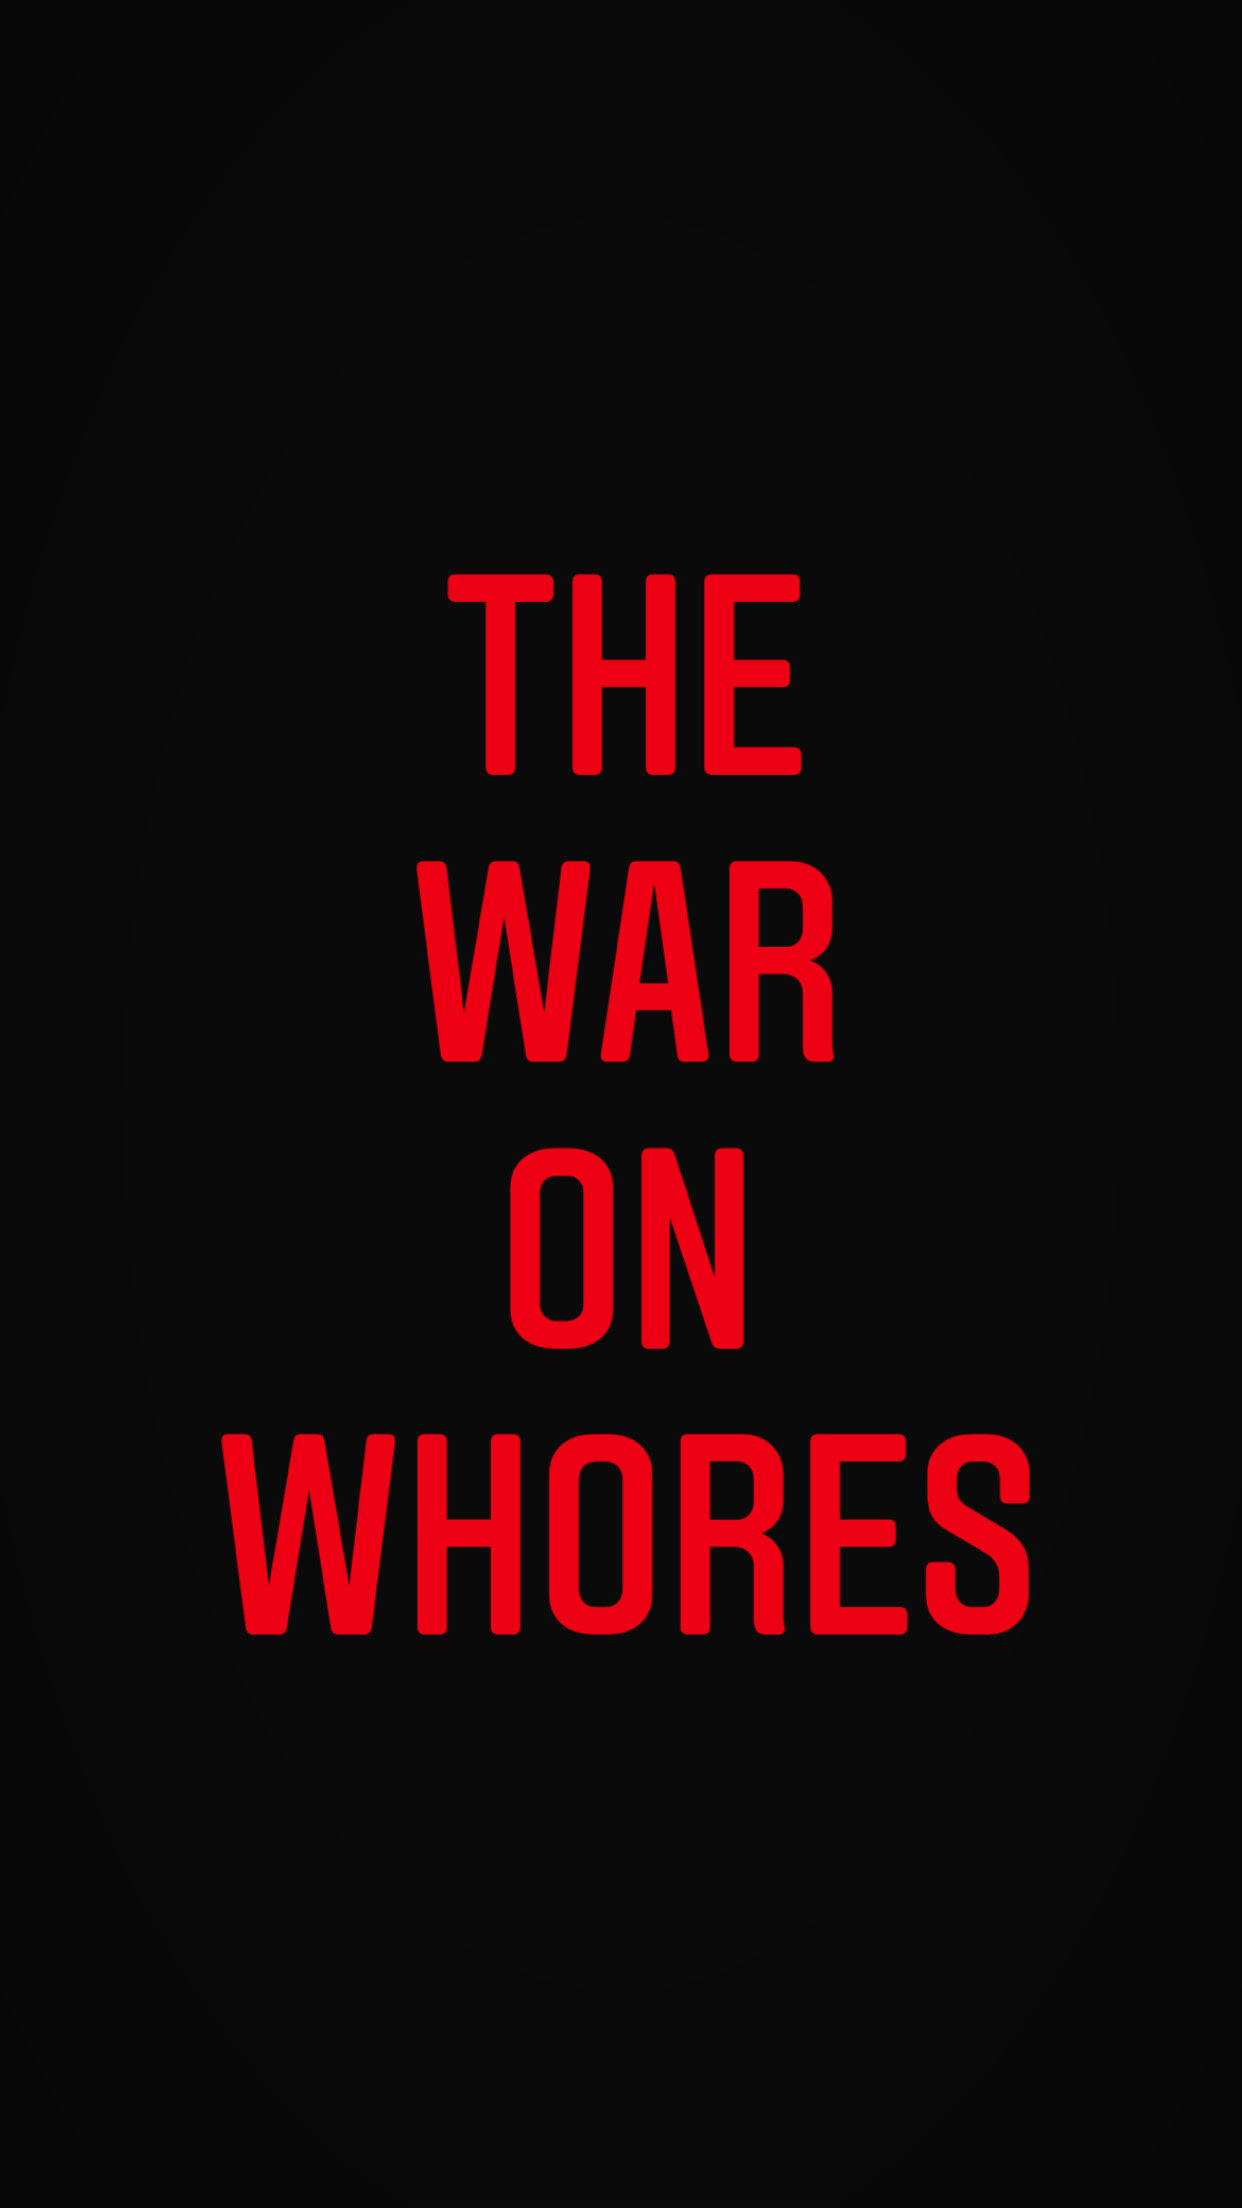 Maggie Mcneill Part 1 The War On Whores Documentary 3cr Community Radio